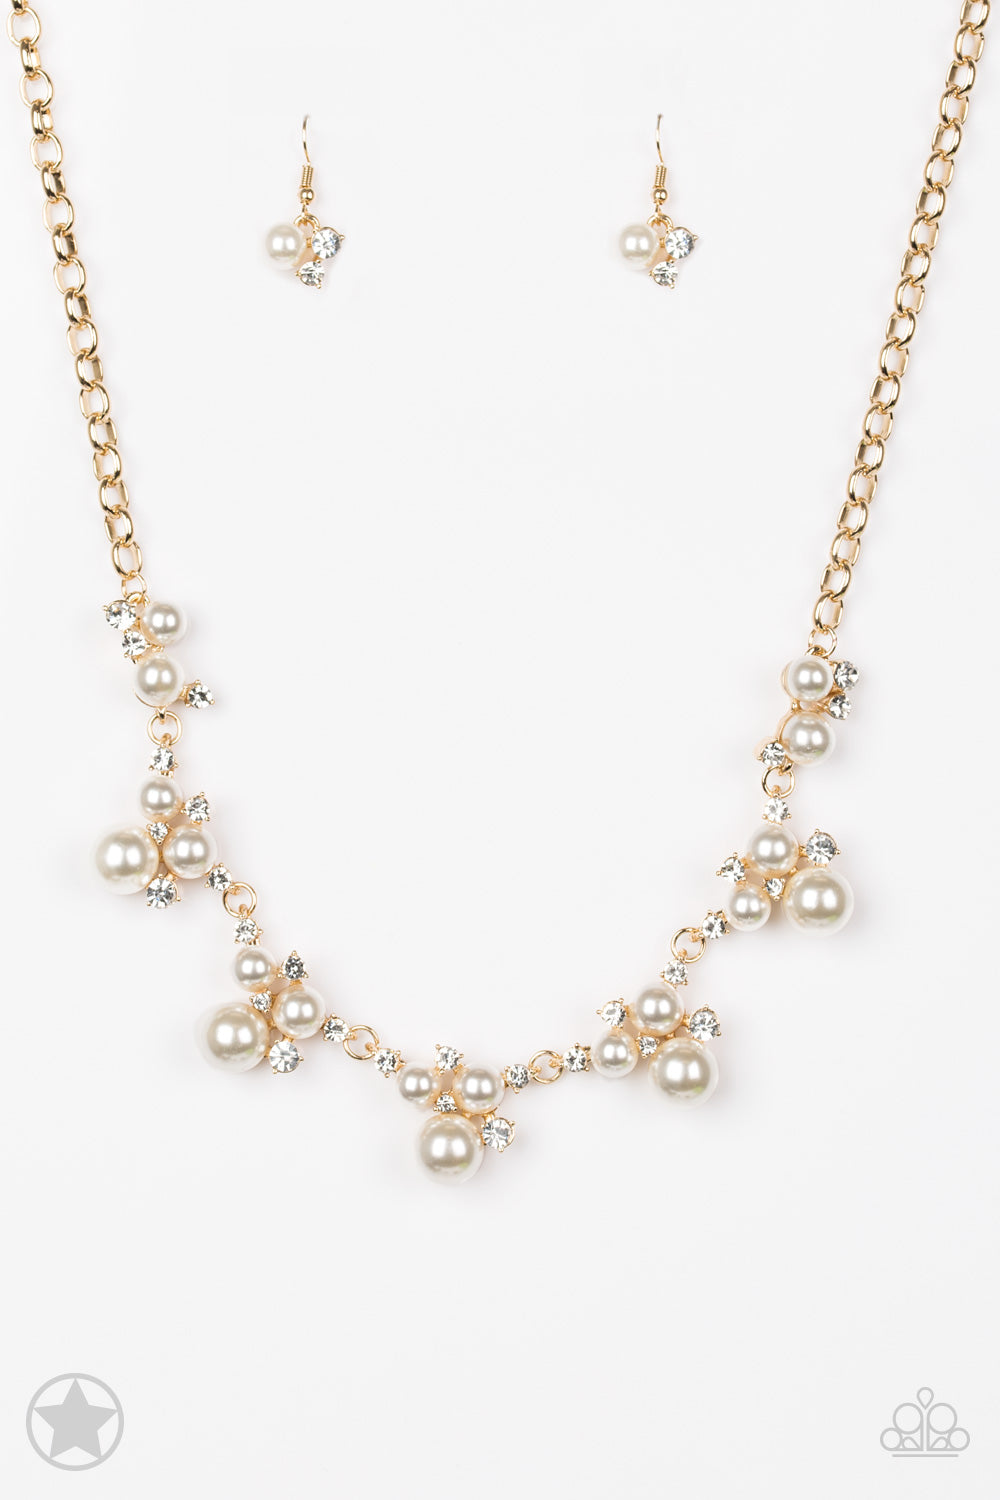 Paparazzi Accessories Toast to Perfection - Gold Blockbuster Necklaces - Lady T Accessories